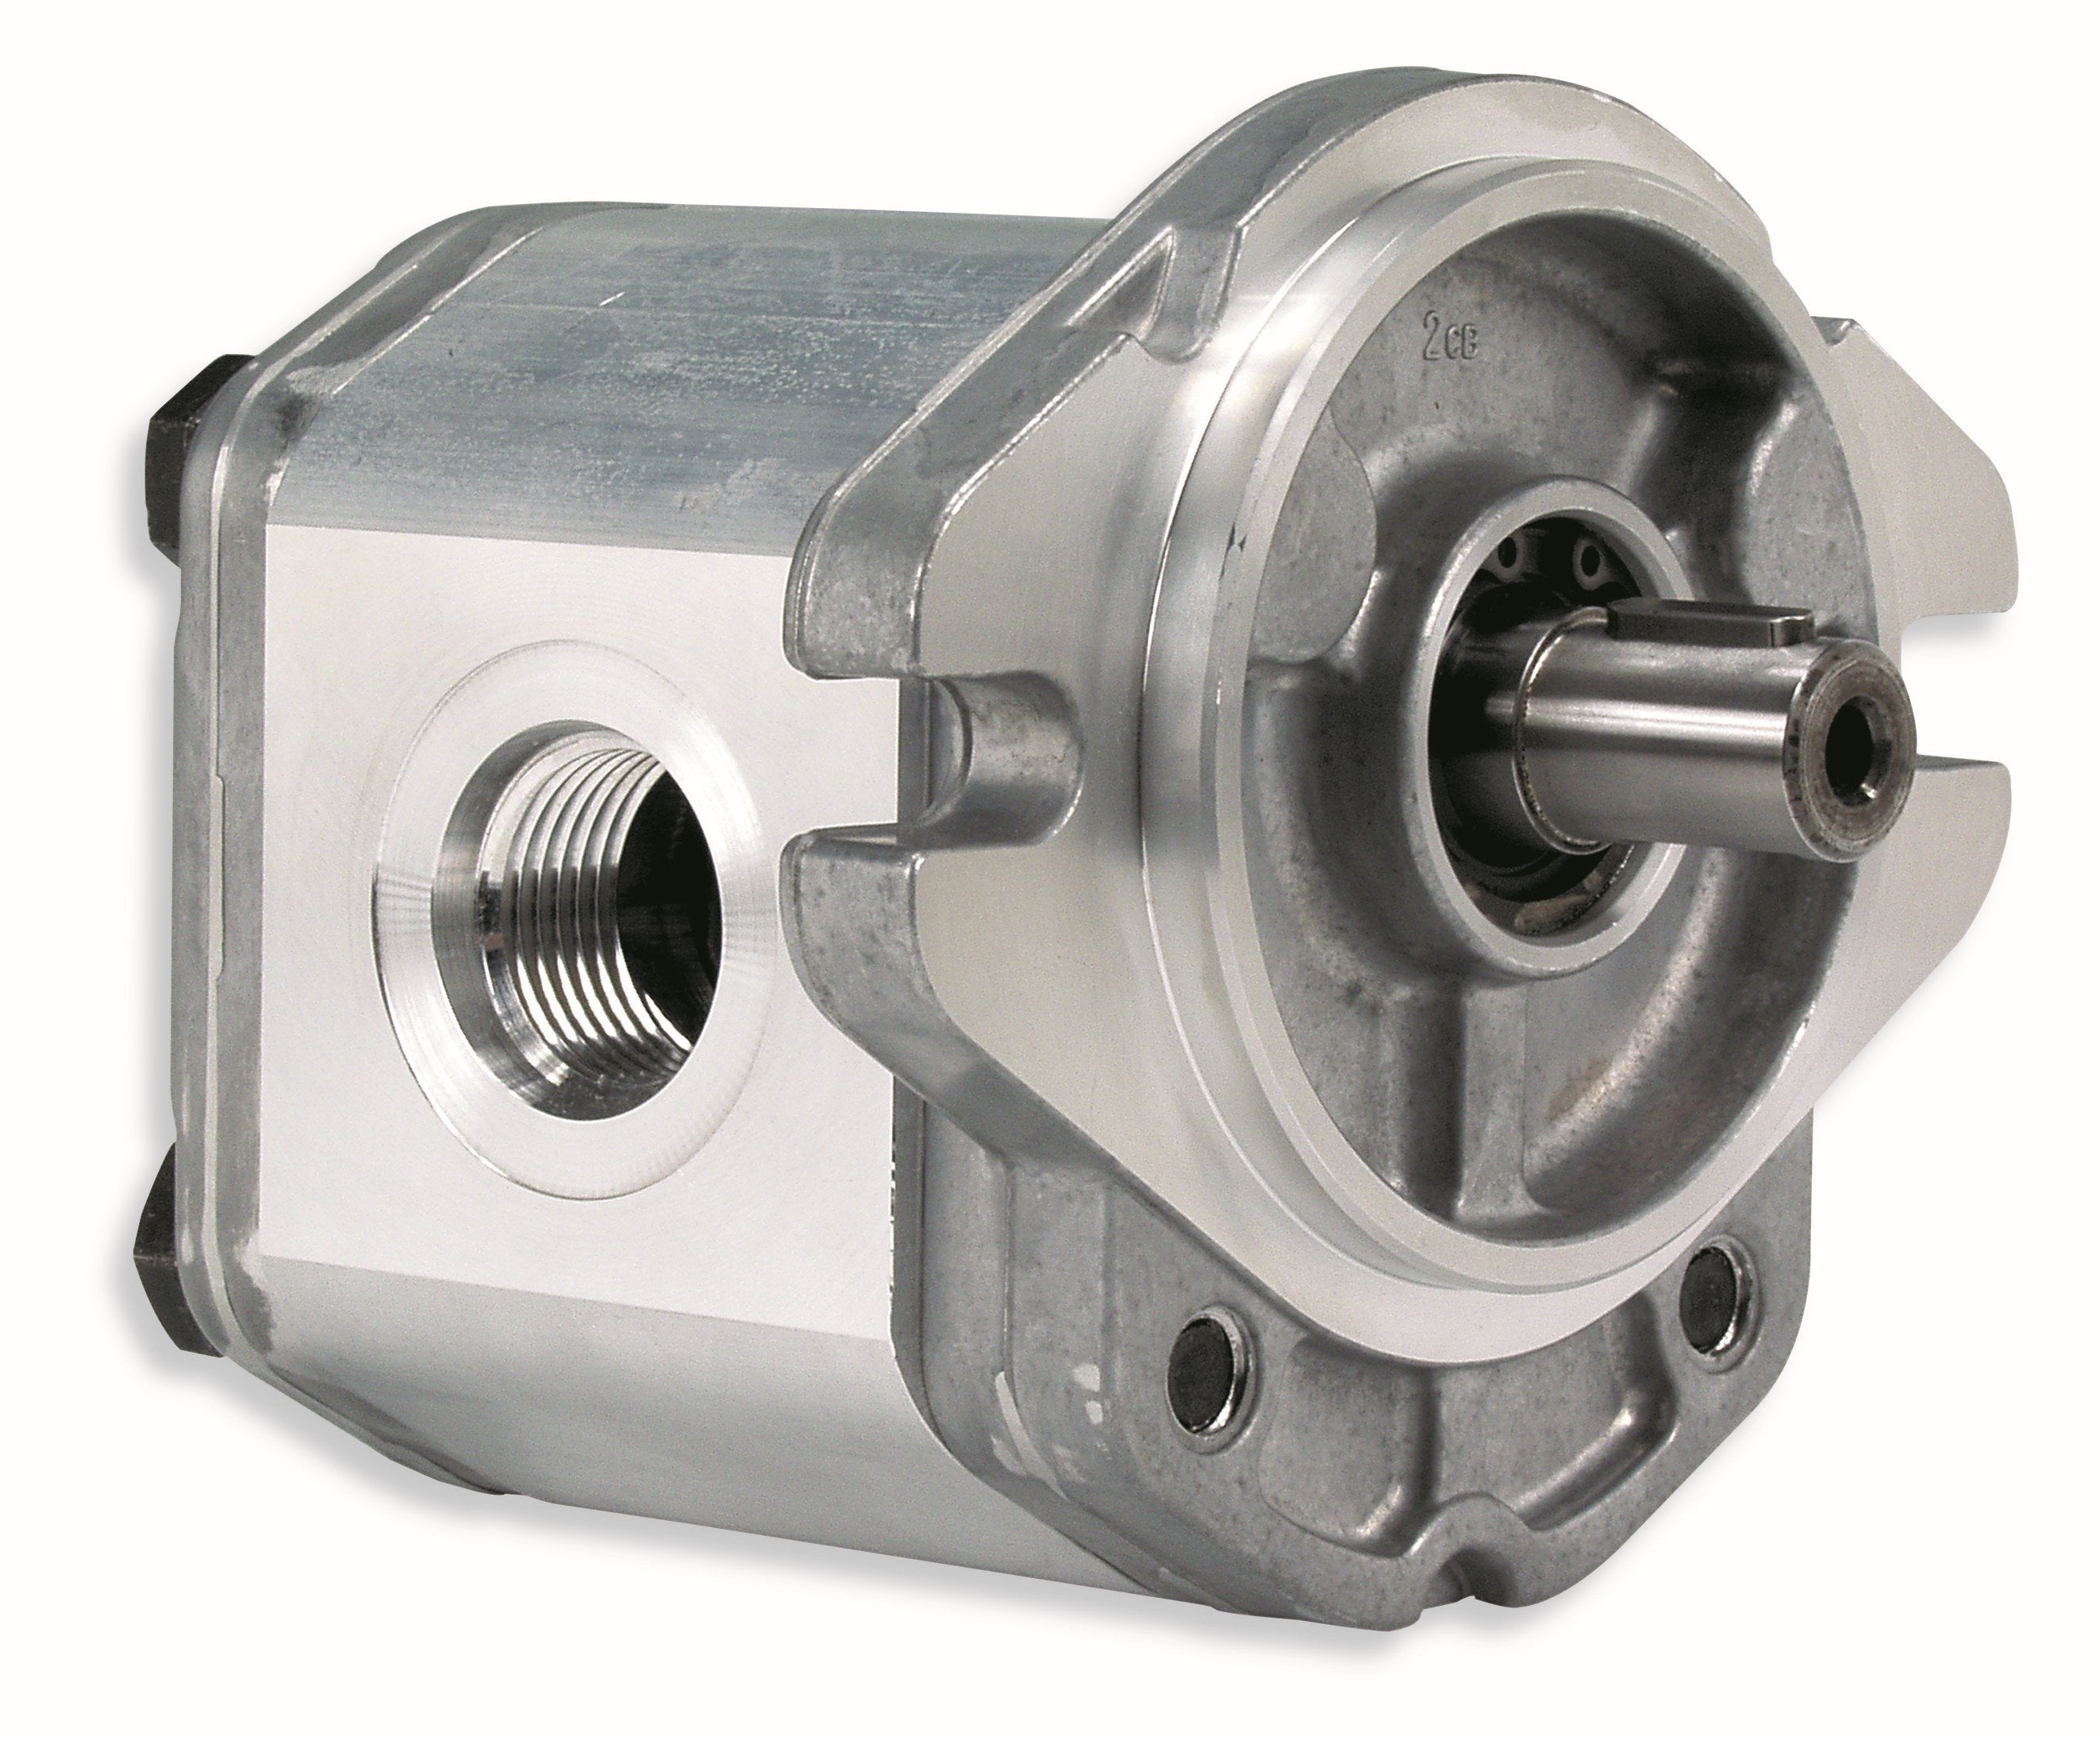 GHM3A-R-120-S1-E4 : Marzocchi Gear Motor, Bidirectional, 78cc, 2610psi rated, 2300RPM, 1.25" Code 61 ports, 13T 16/32DP Splined Shaft